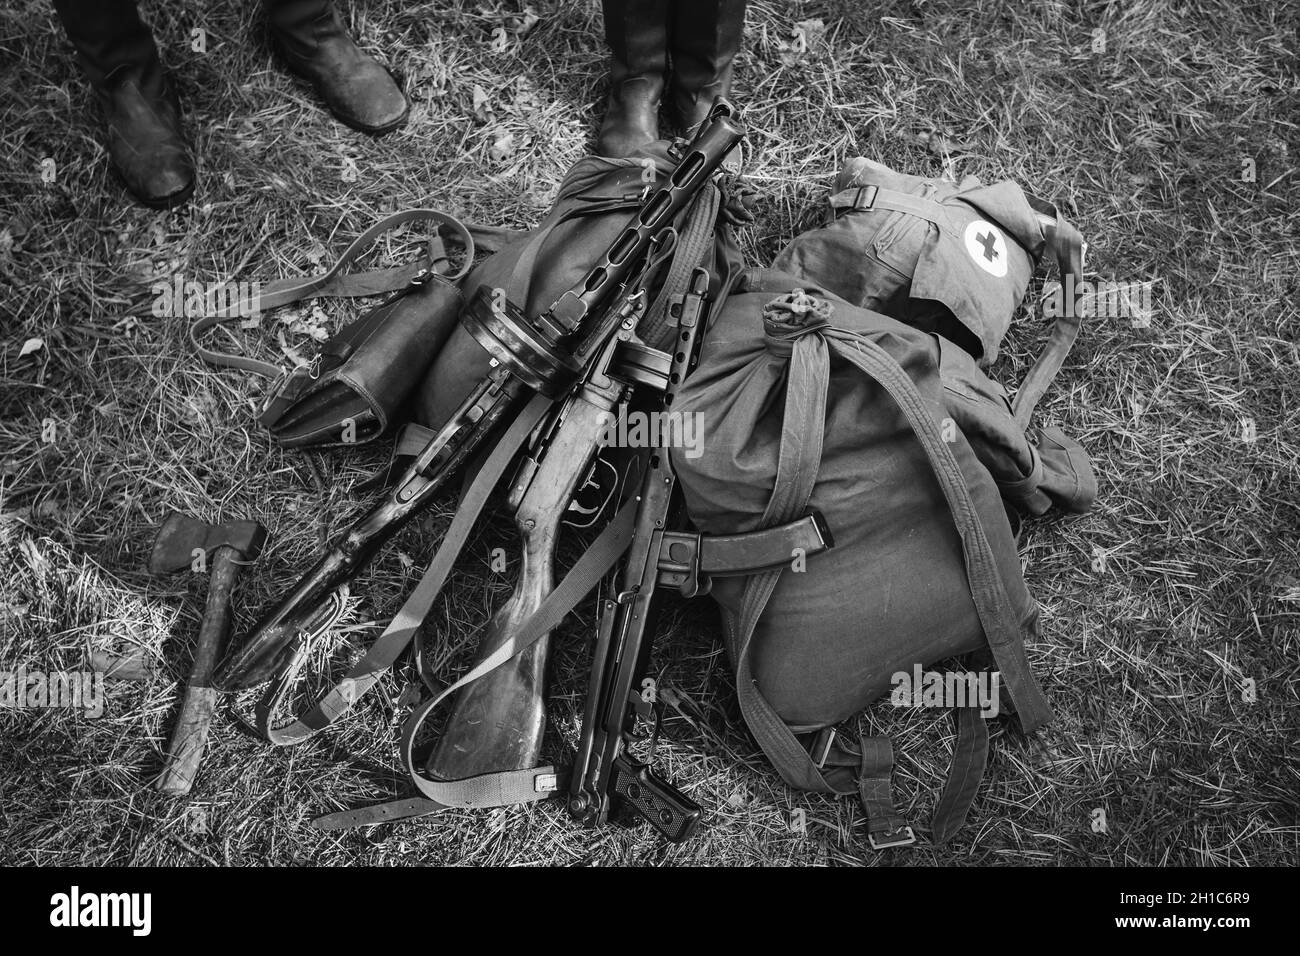 Soviet Russian Military Infantry Ammunition On Ground World War II Soviet Red Army Weapon. Submachine Guns PPS-43 And PPSh-41 On Ground. WWII WW2 Stock Photo